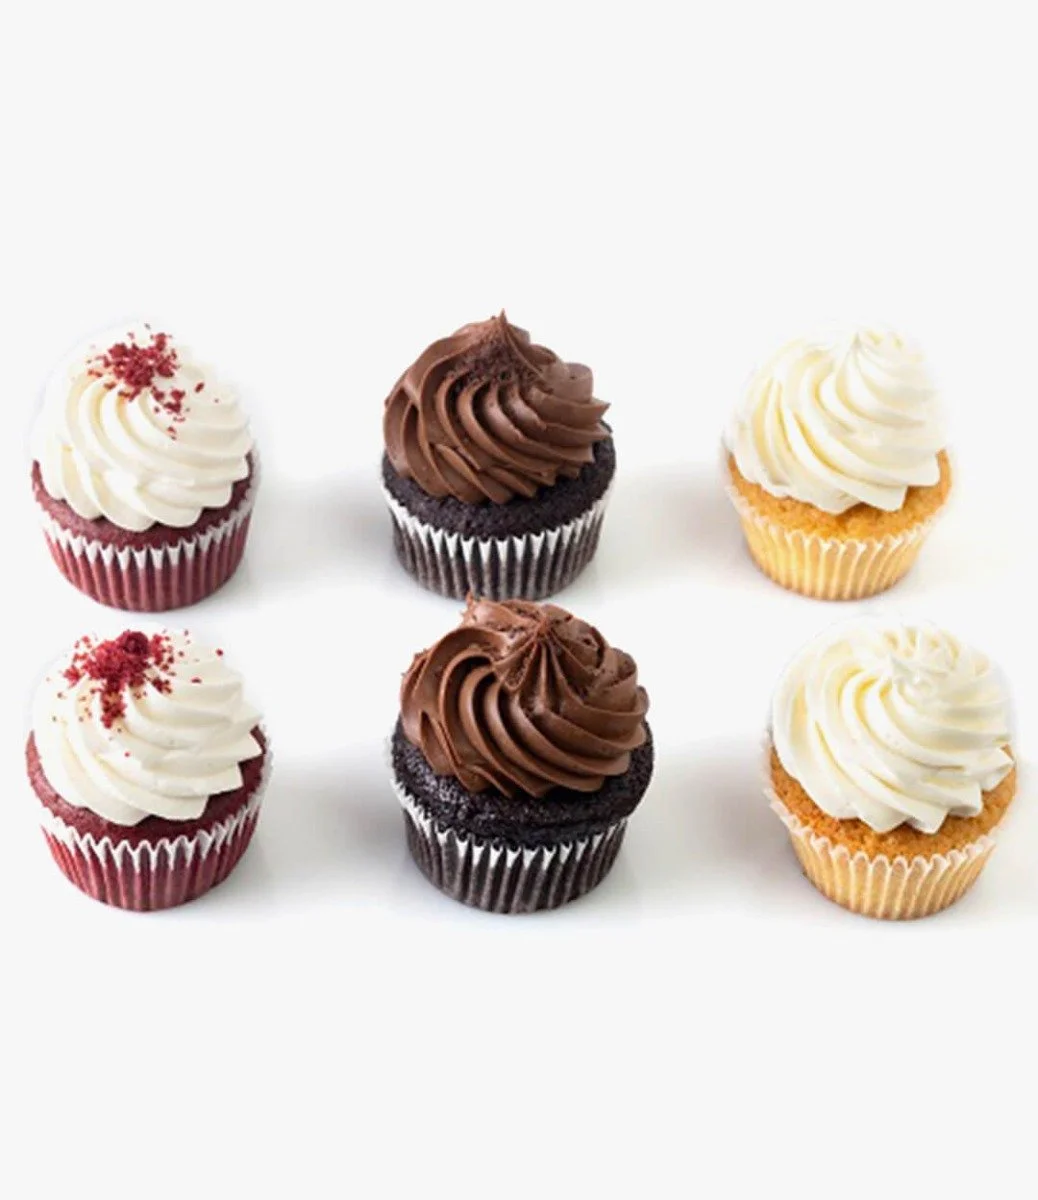 Keto Assorted Cupcakes By Cake Social